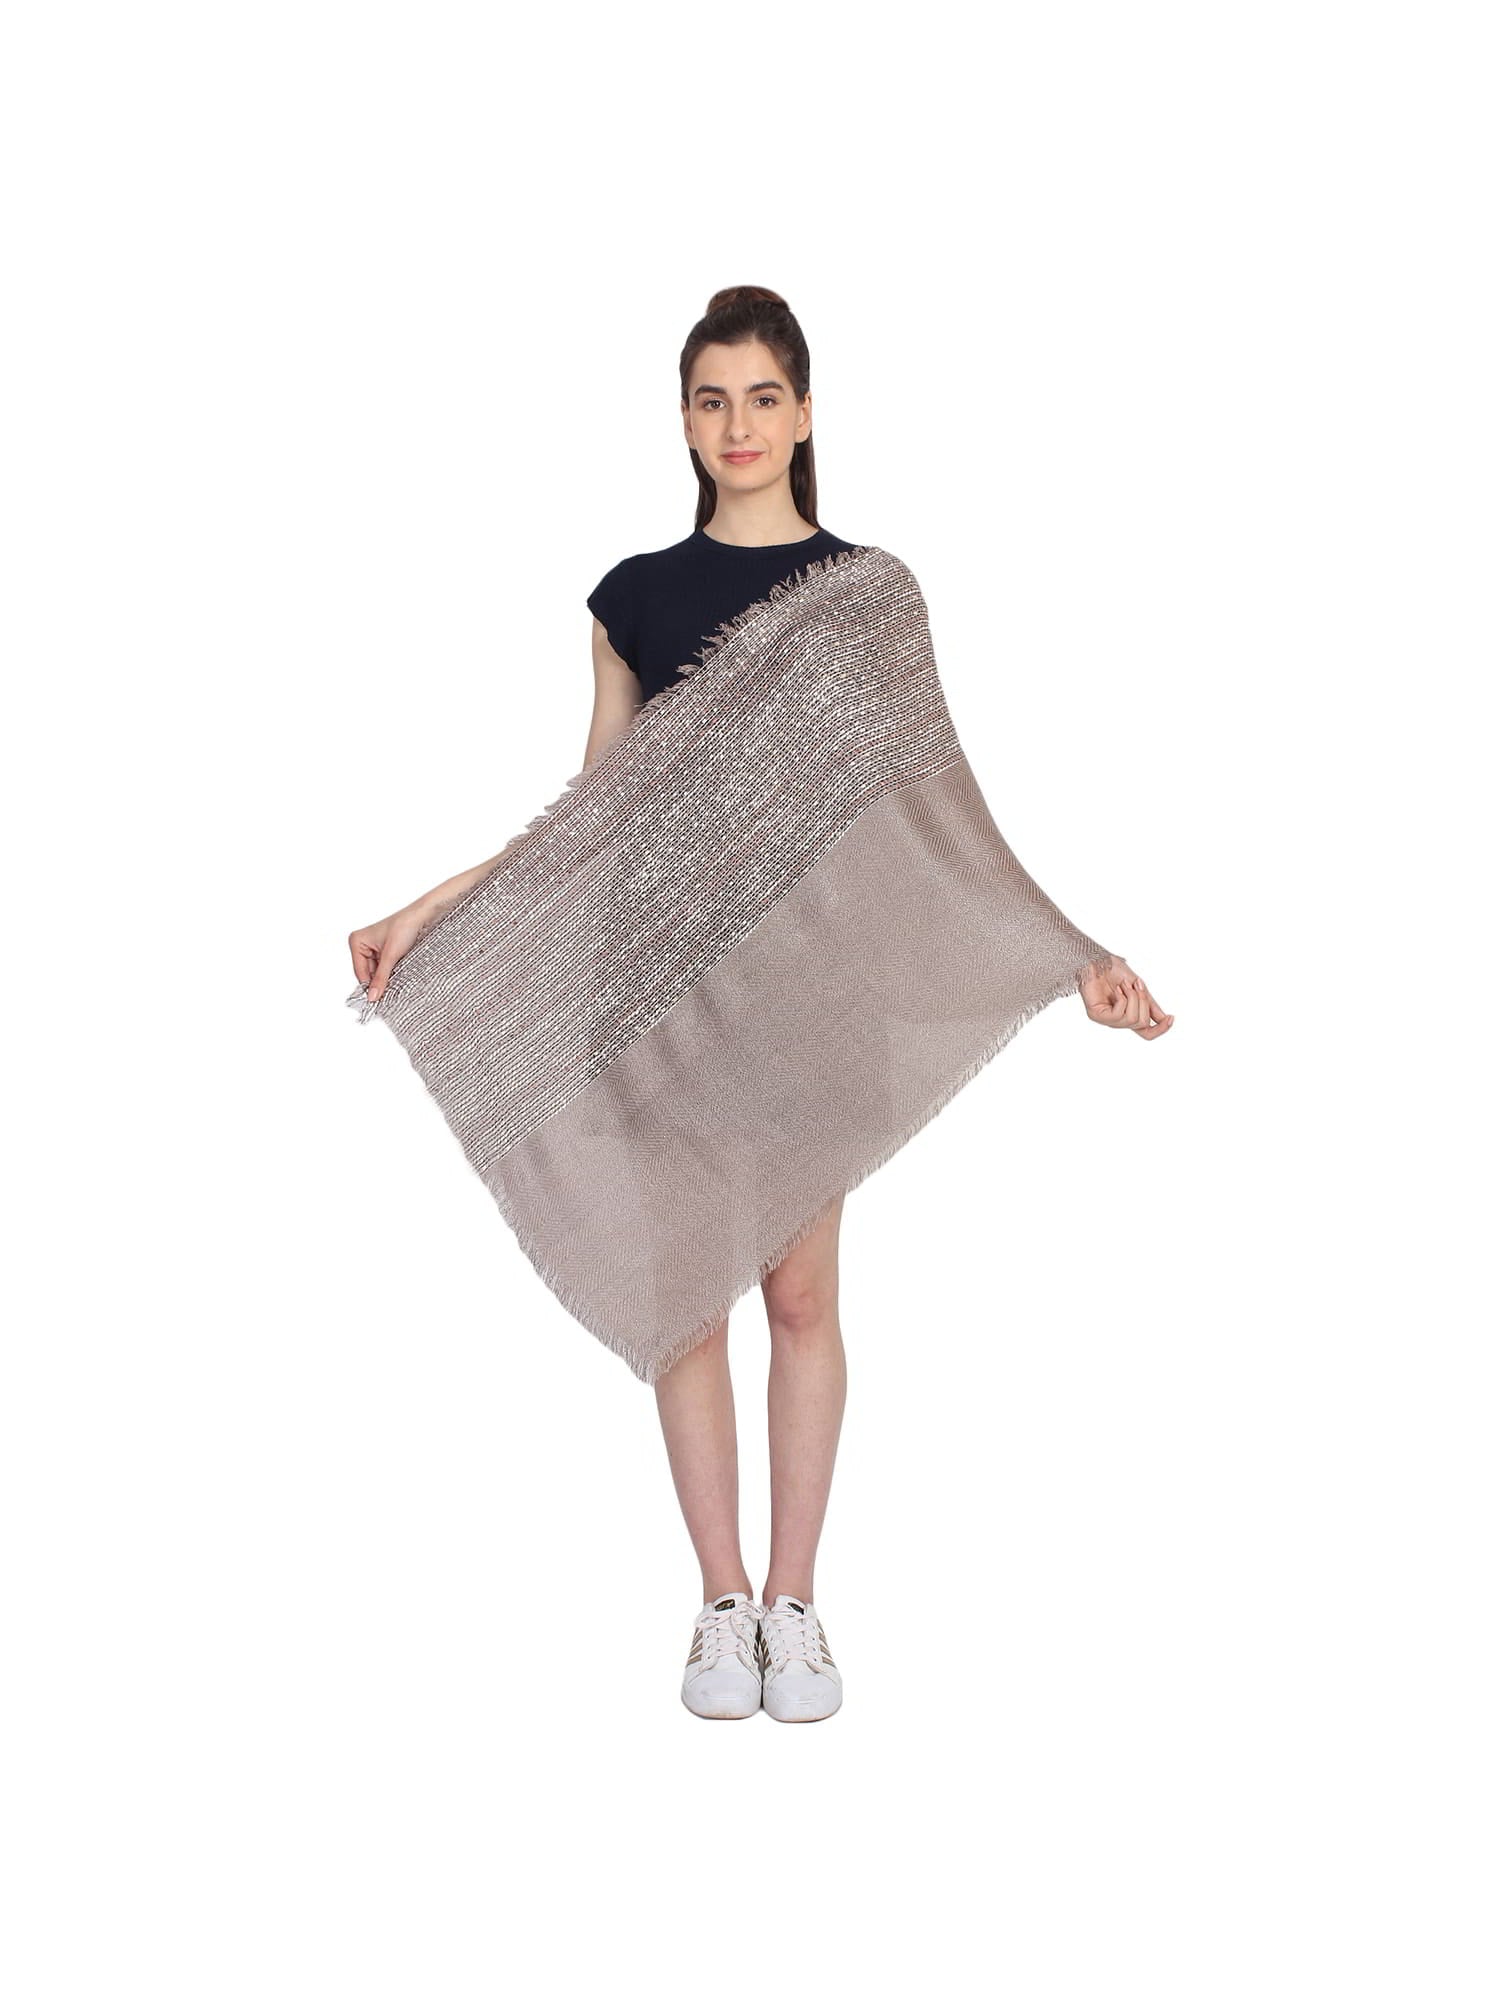 Quirky Viscose Rayon Stole